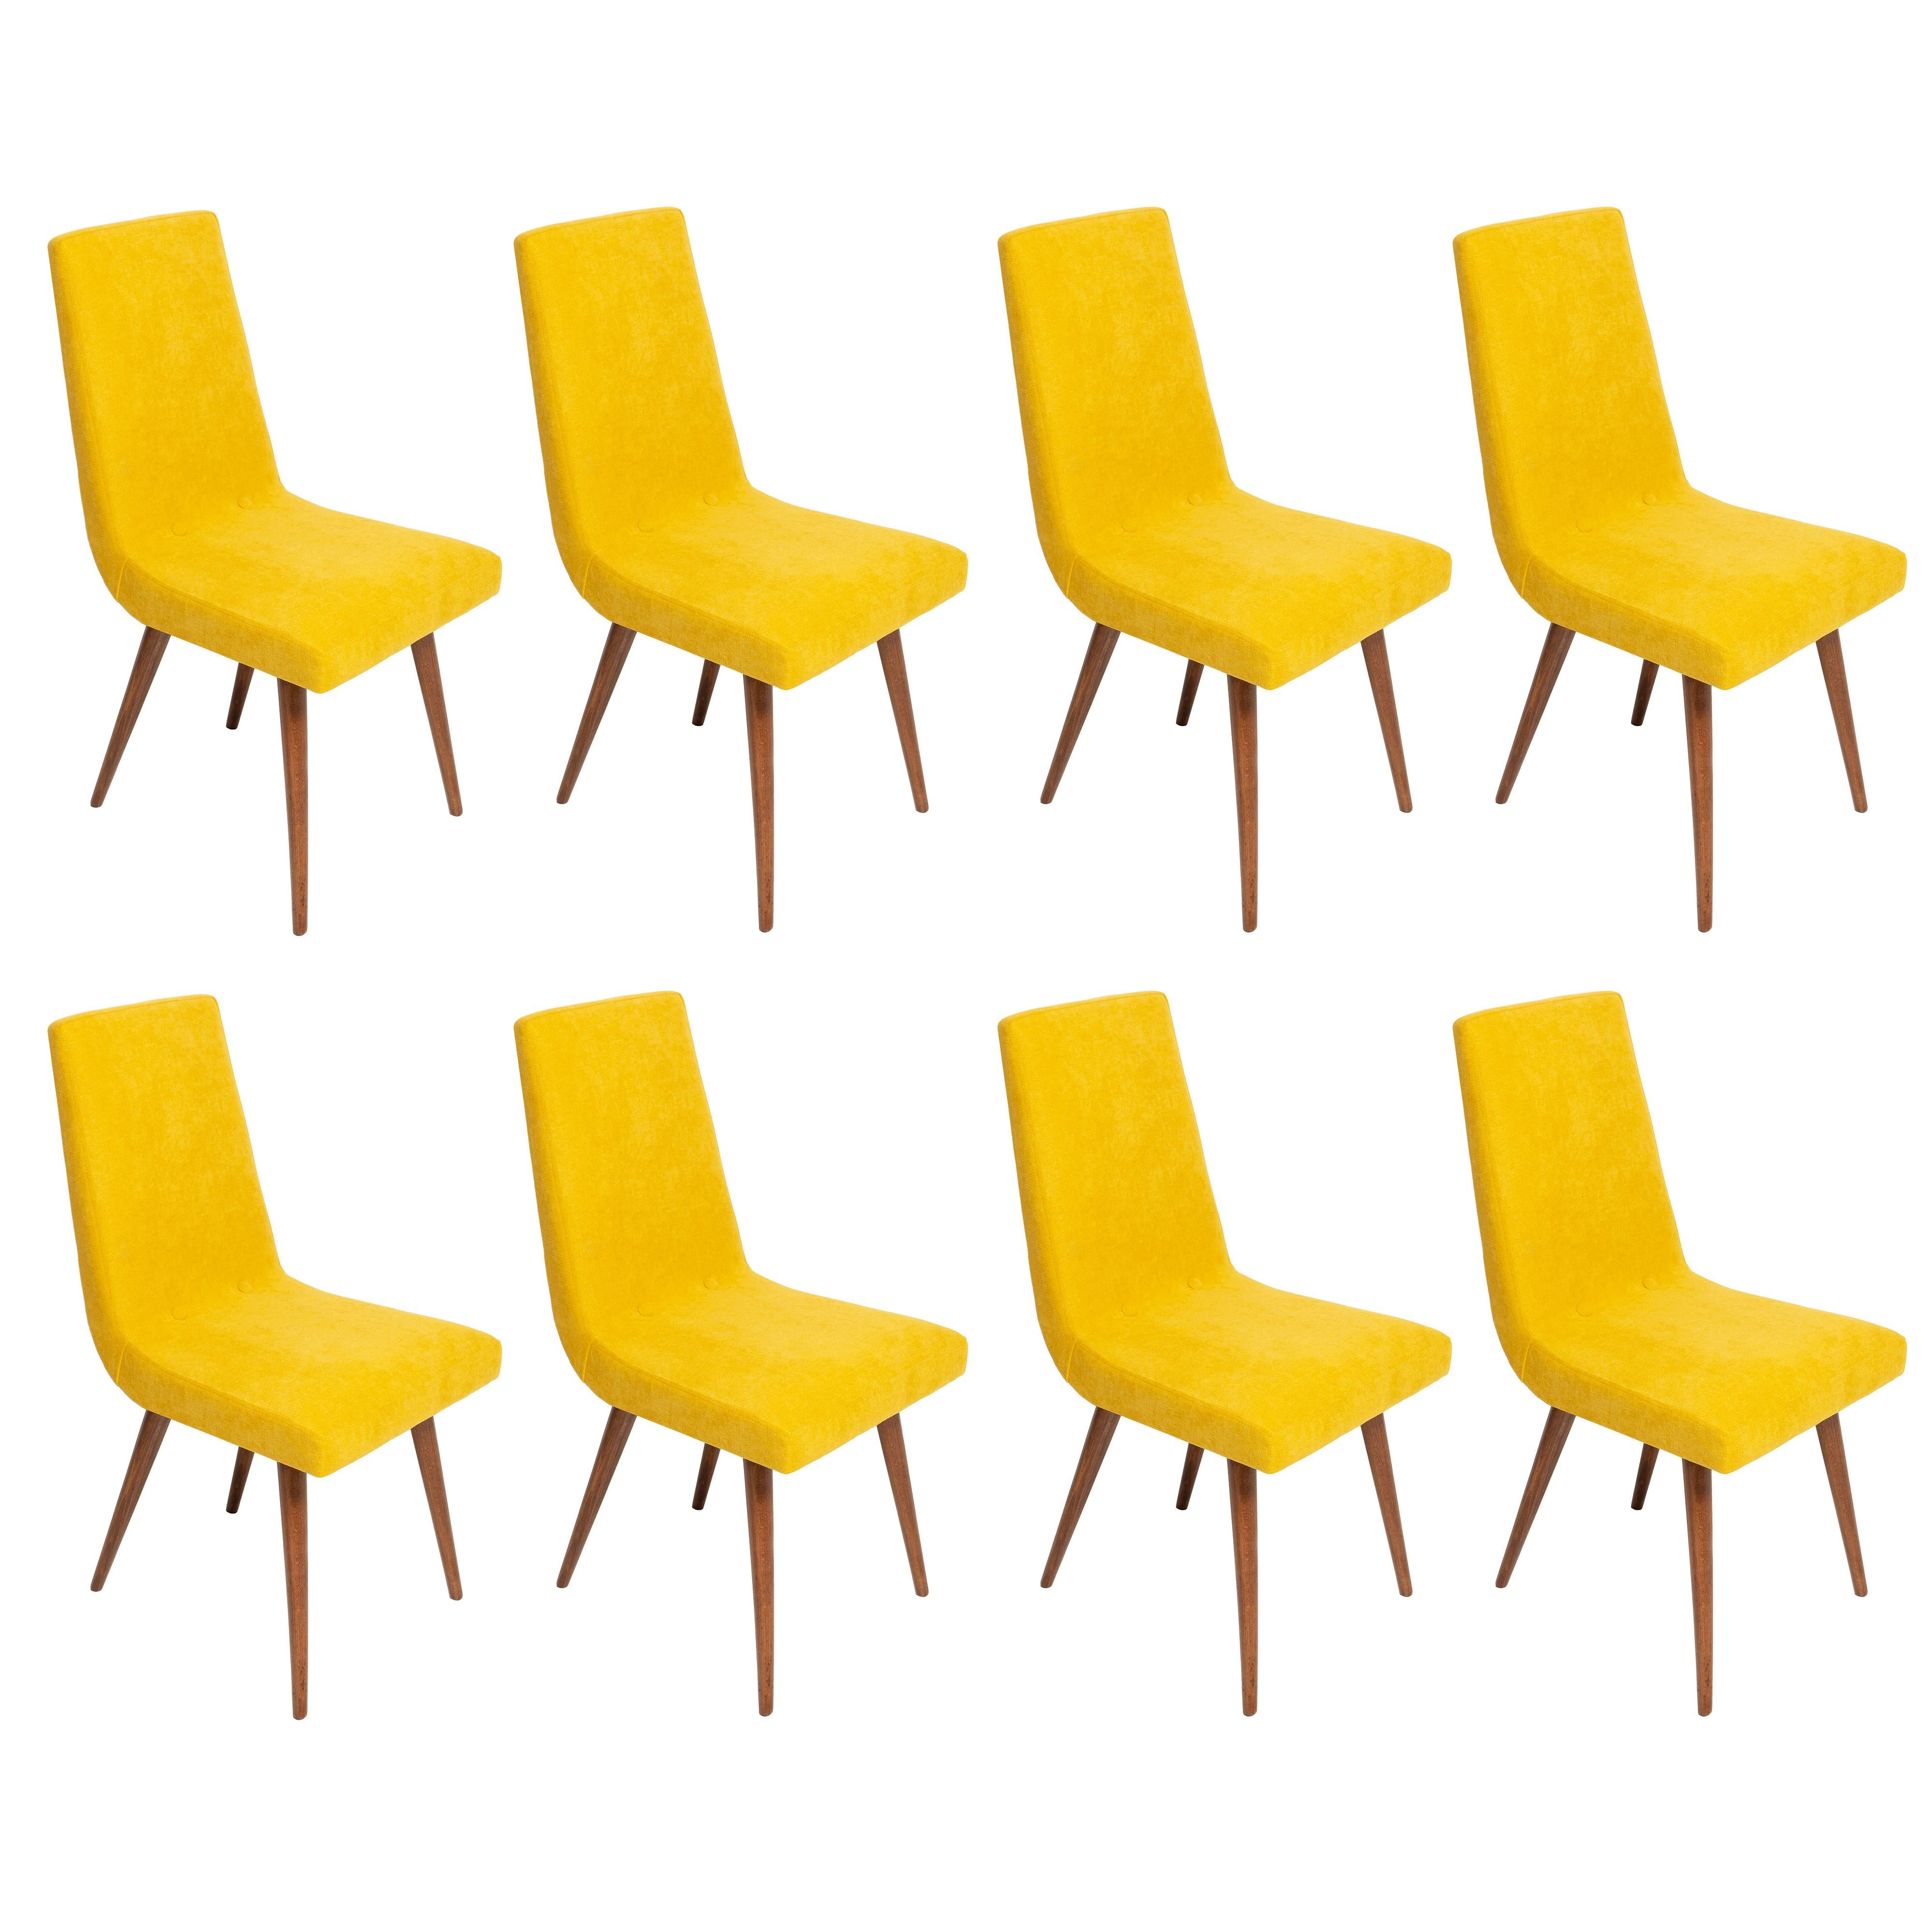 Chair designed by Prof. Rajmund Halas. Have been made of beechwood. The chair is after complete upholstery renovation, the woodwork has been cleaned and refreshed. We used matte varnish. Seat and back was dressed in a mustard yellow, durable and